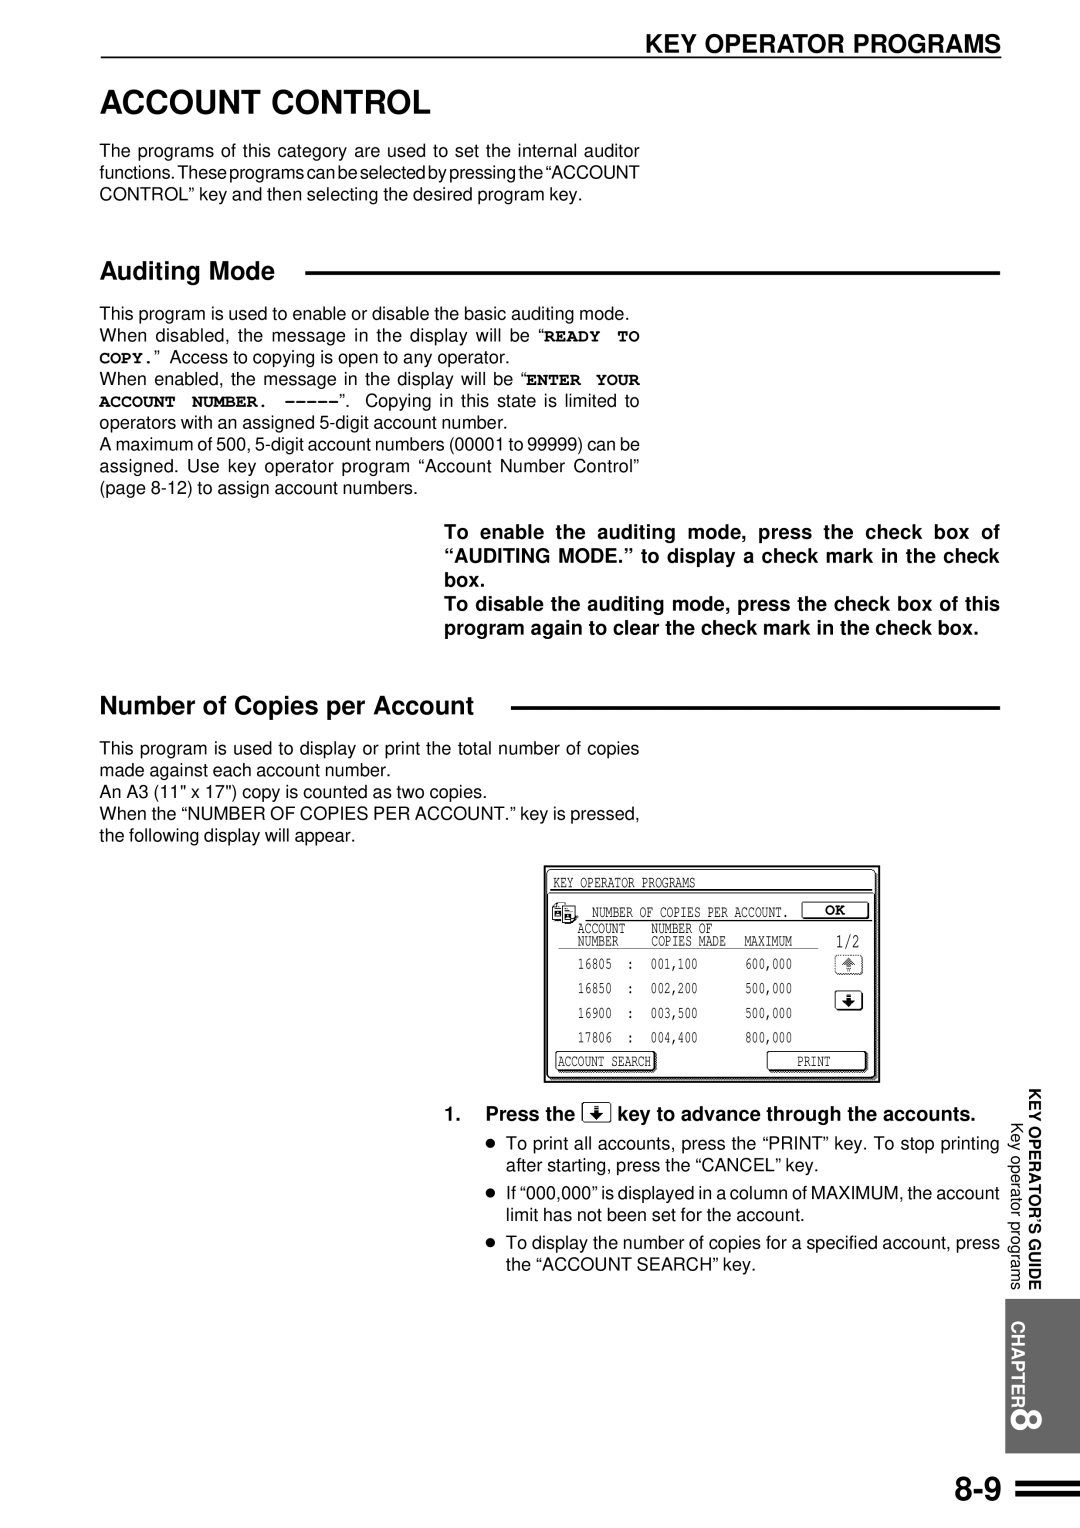 Sharp AR-507 operation manual Account Control, Key Operator Programs, Auditing Mode, Number of Copies per Account 